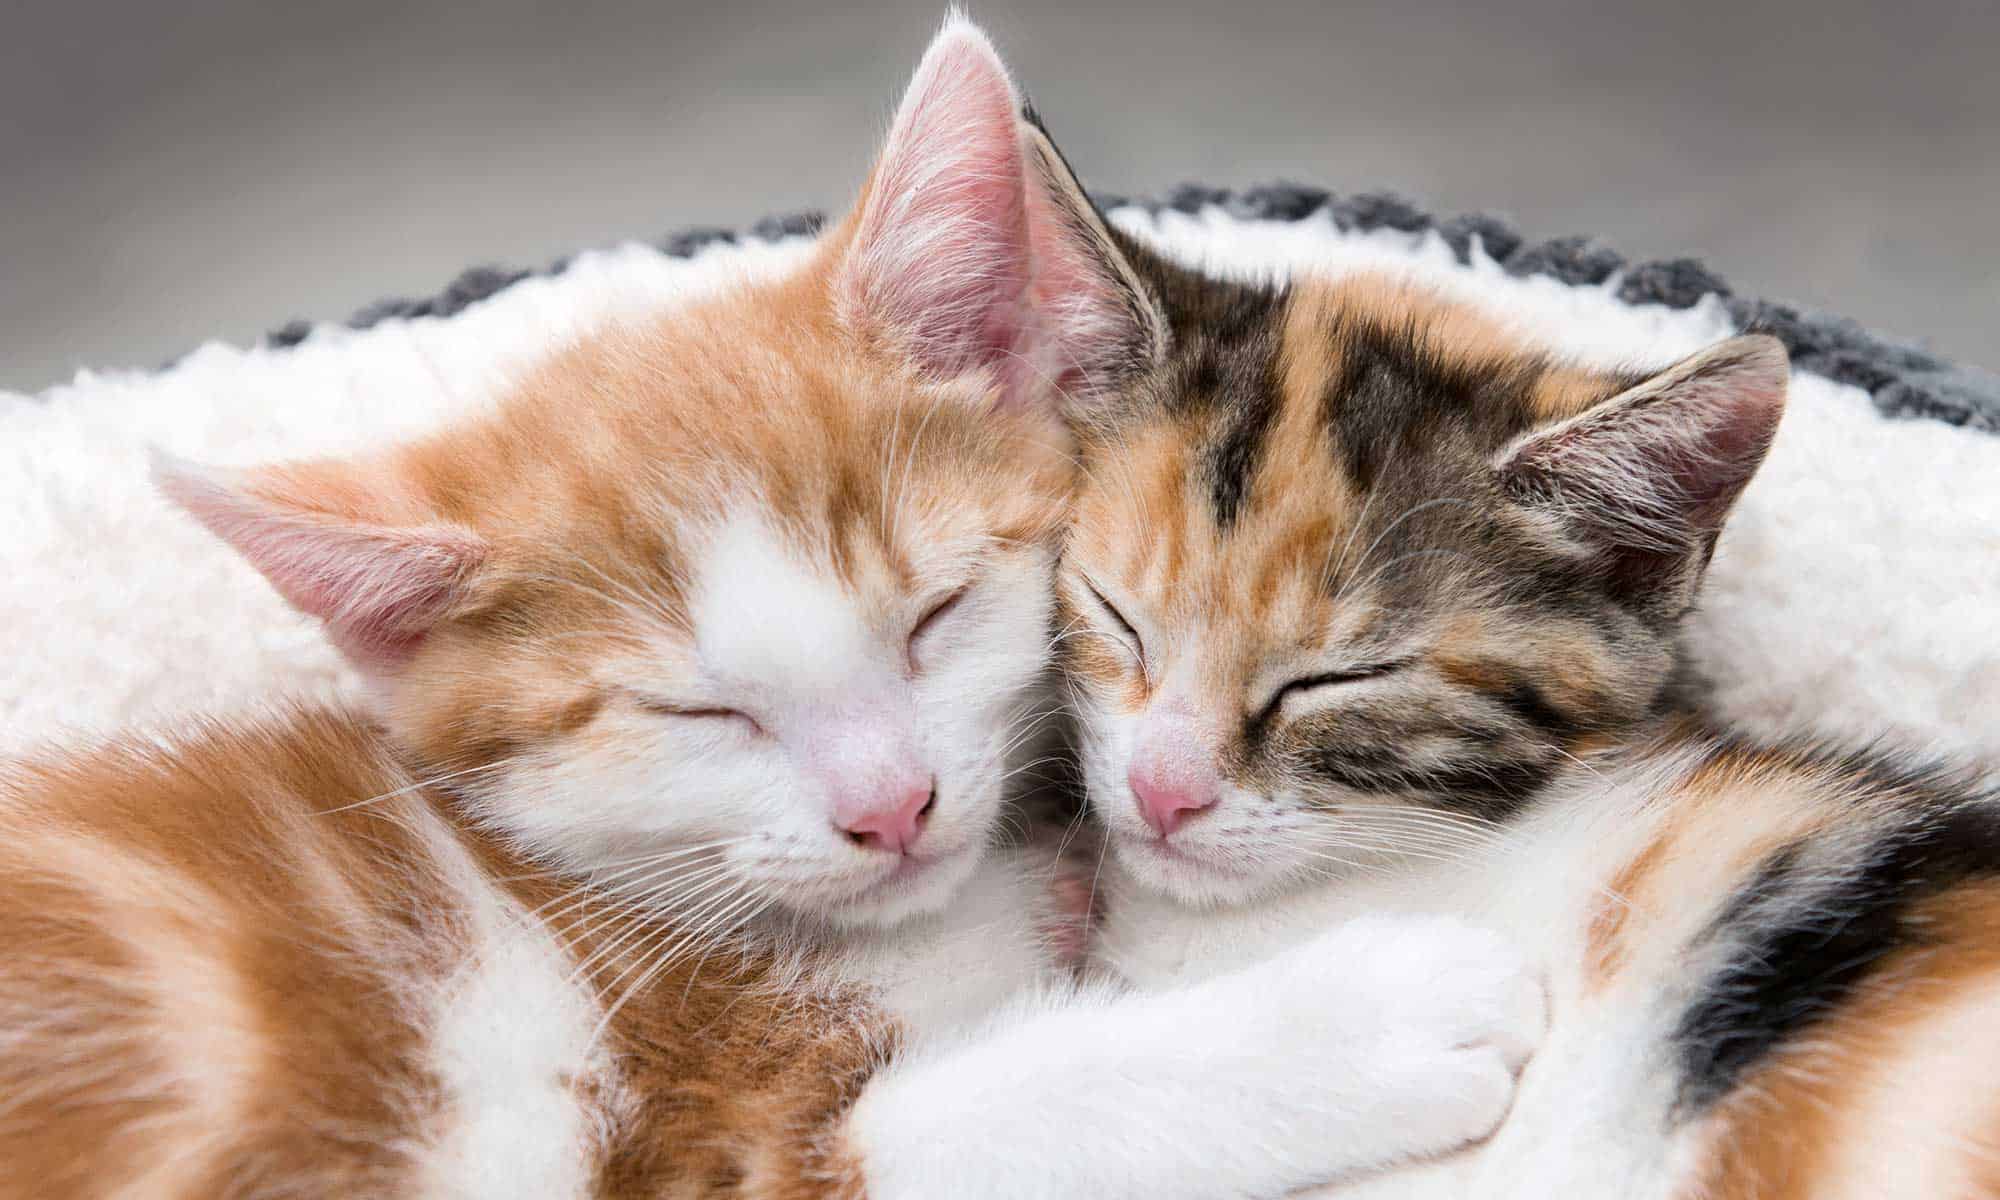 Two cats curled up together